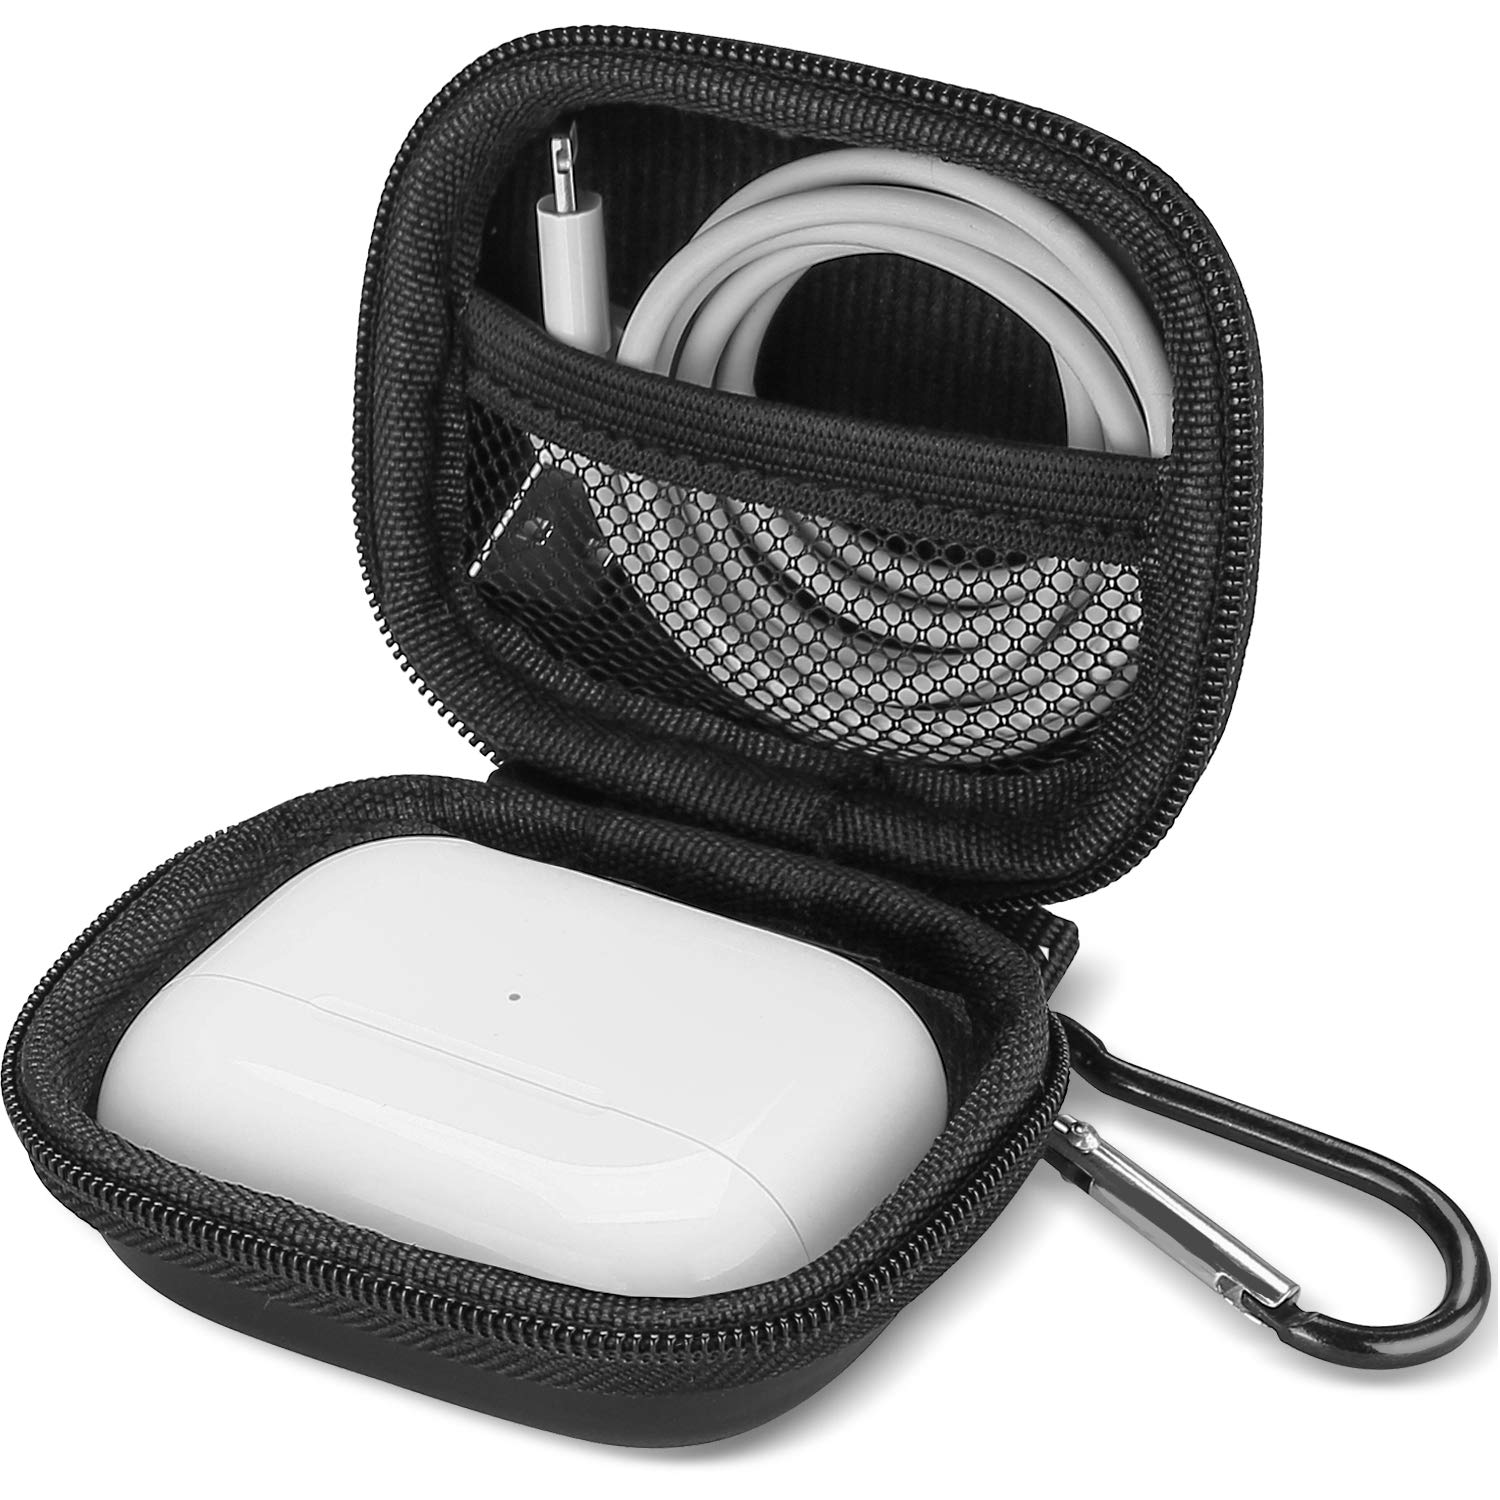  ProCase Hard Case for New AirPods Max, Travel Carrying